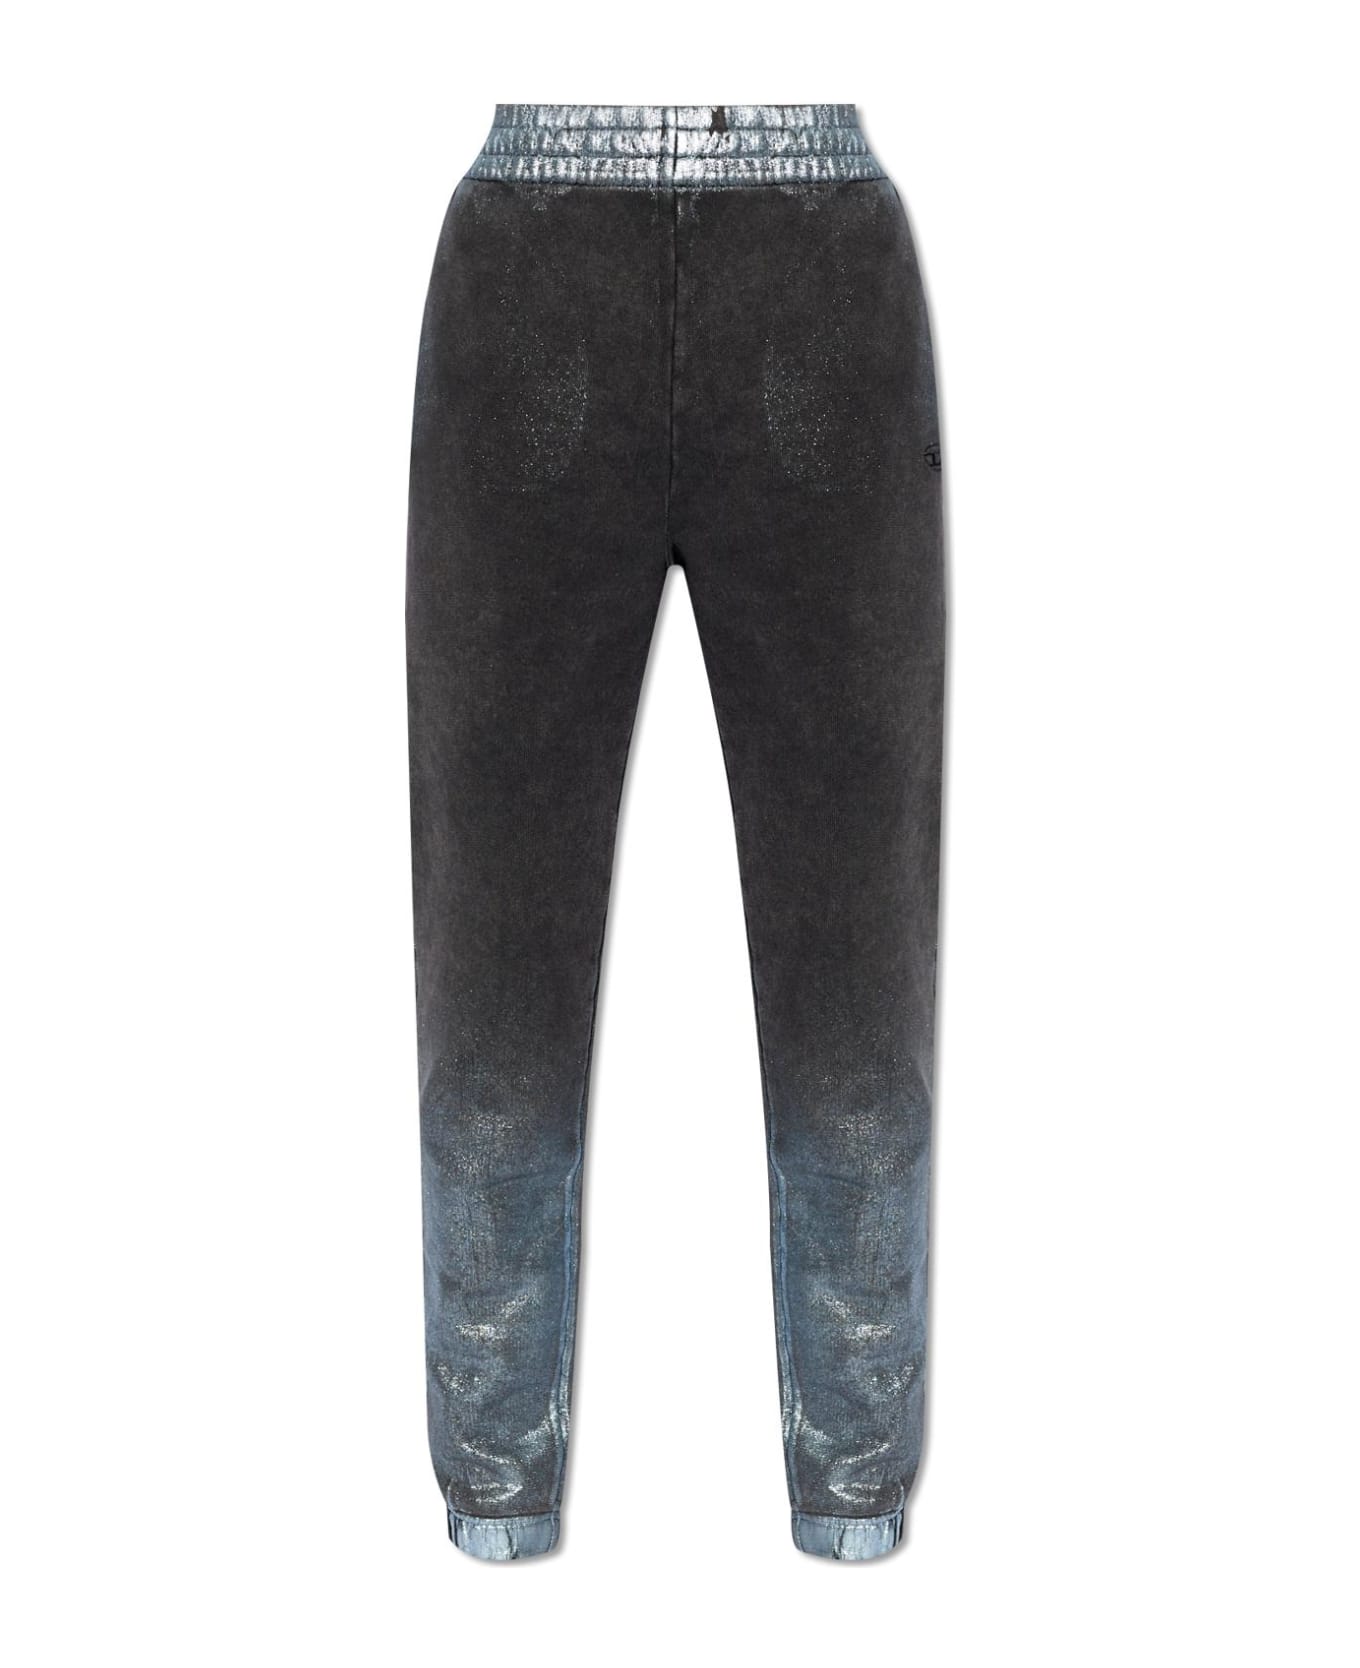 Diesel Painted Track Pants - Non definito